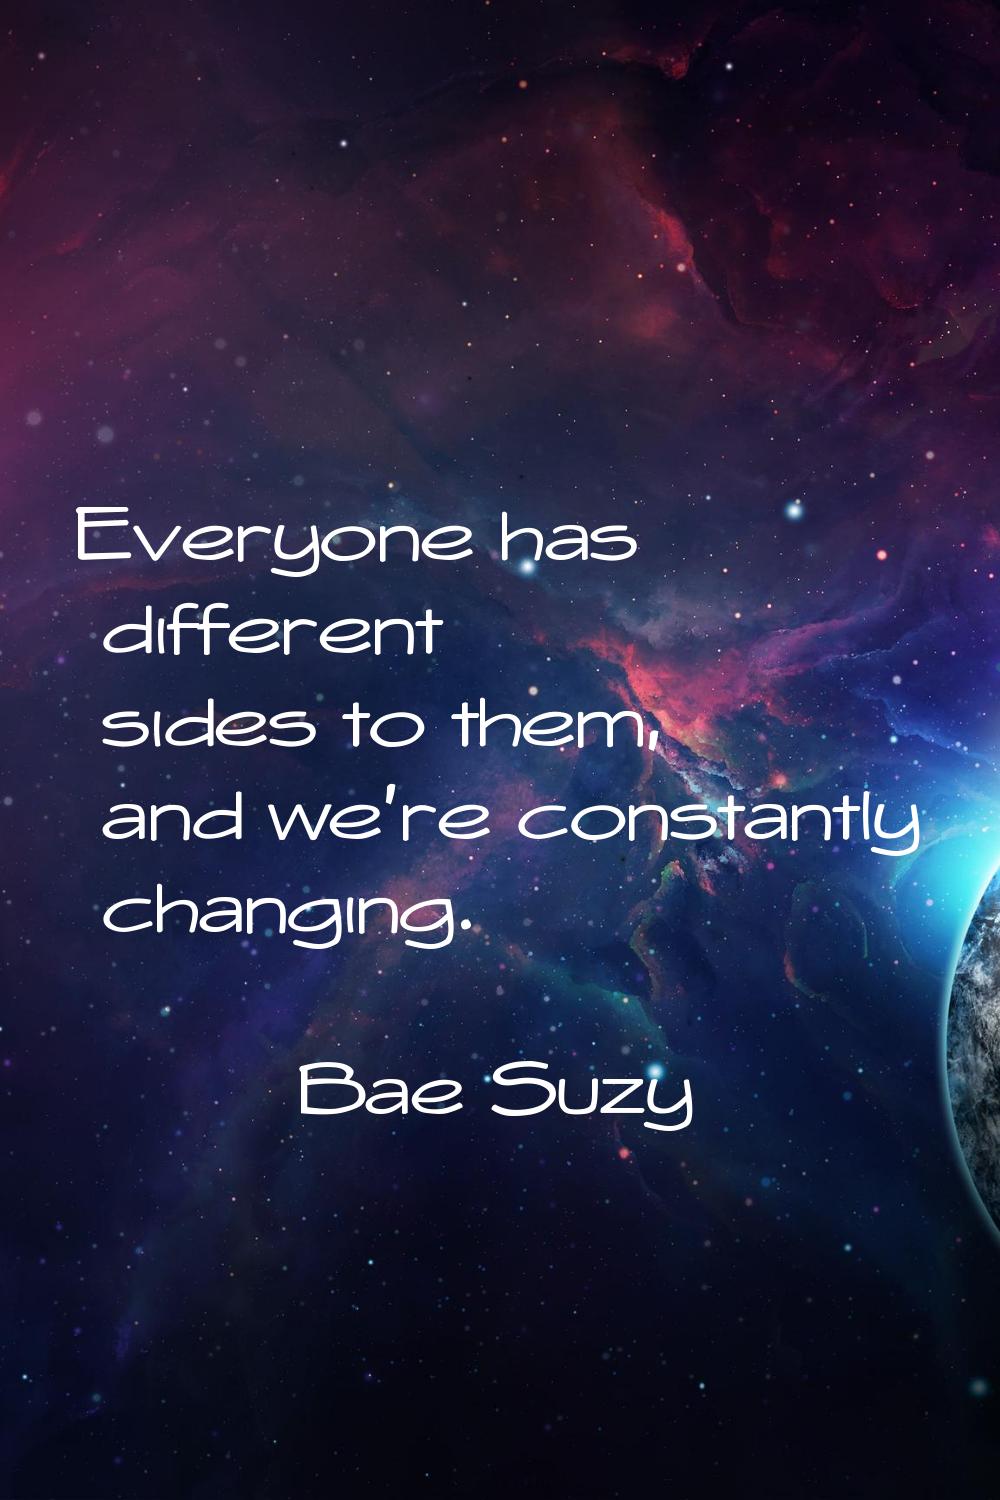 Everyone has different sides to them, and we're constantly changing.